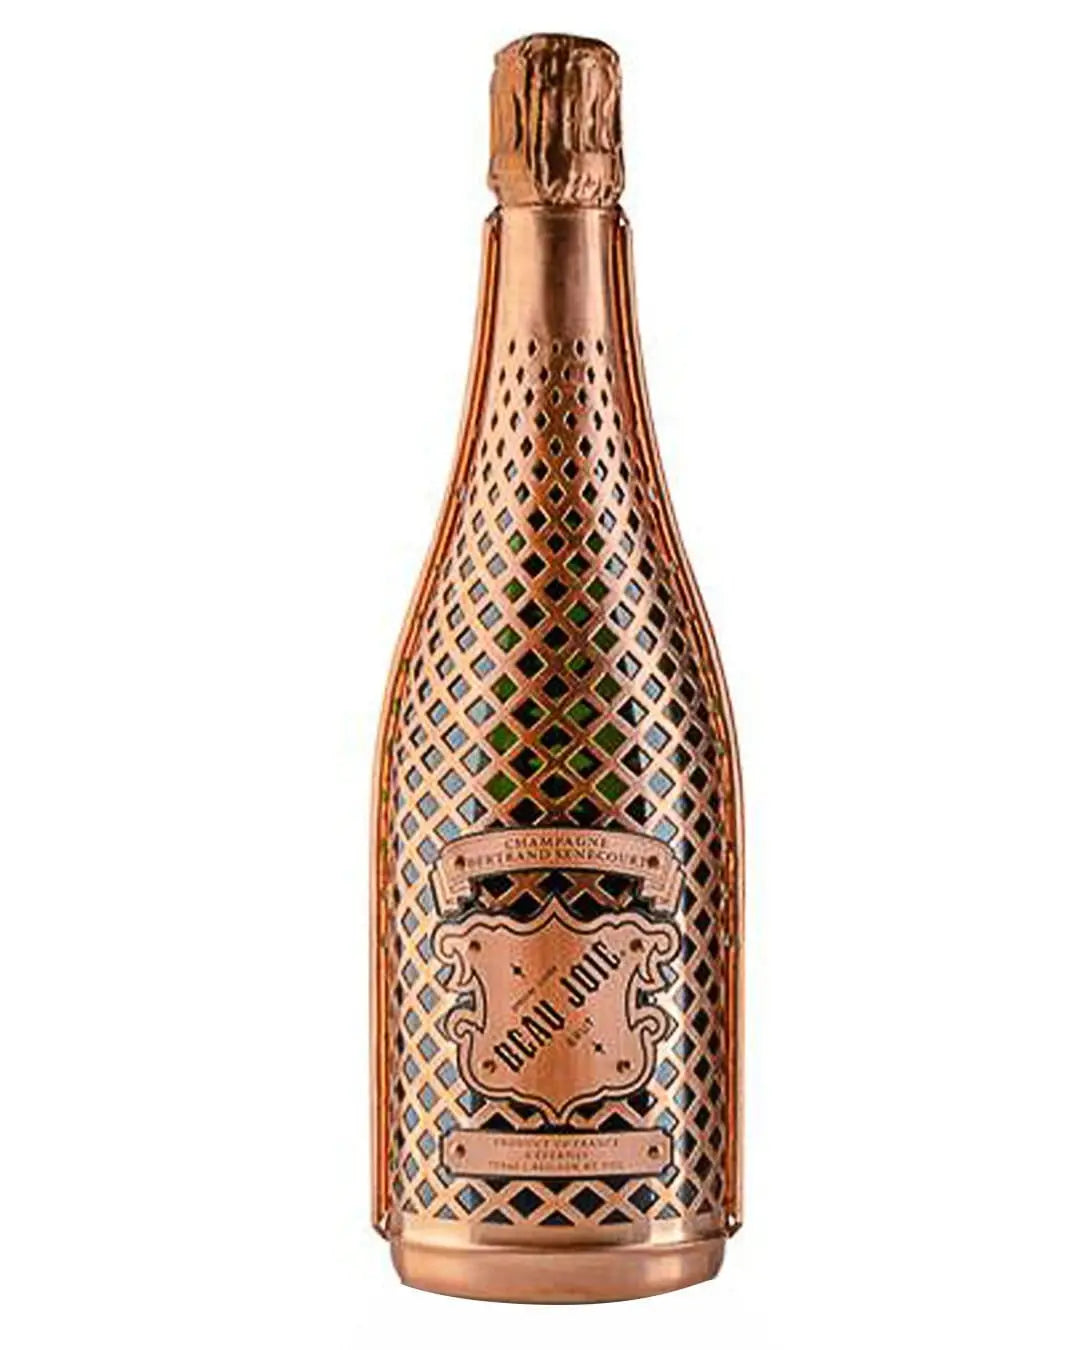 Beau Joie Brut Champagne NV, 75 cl Champagne & Sparkling